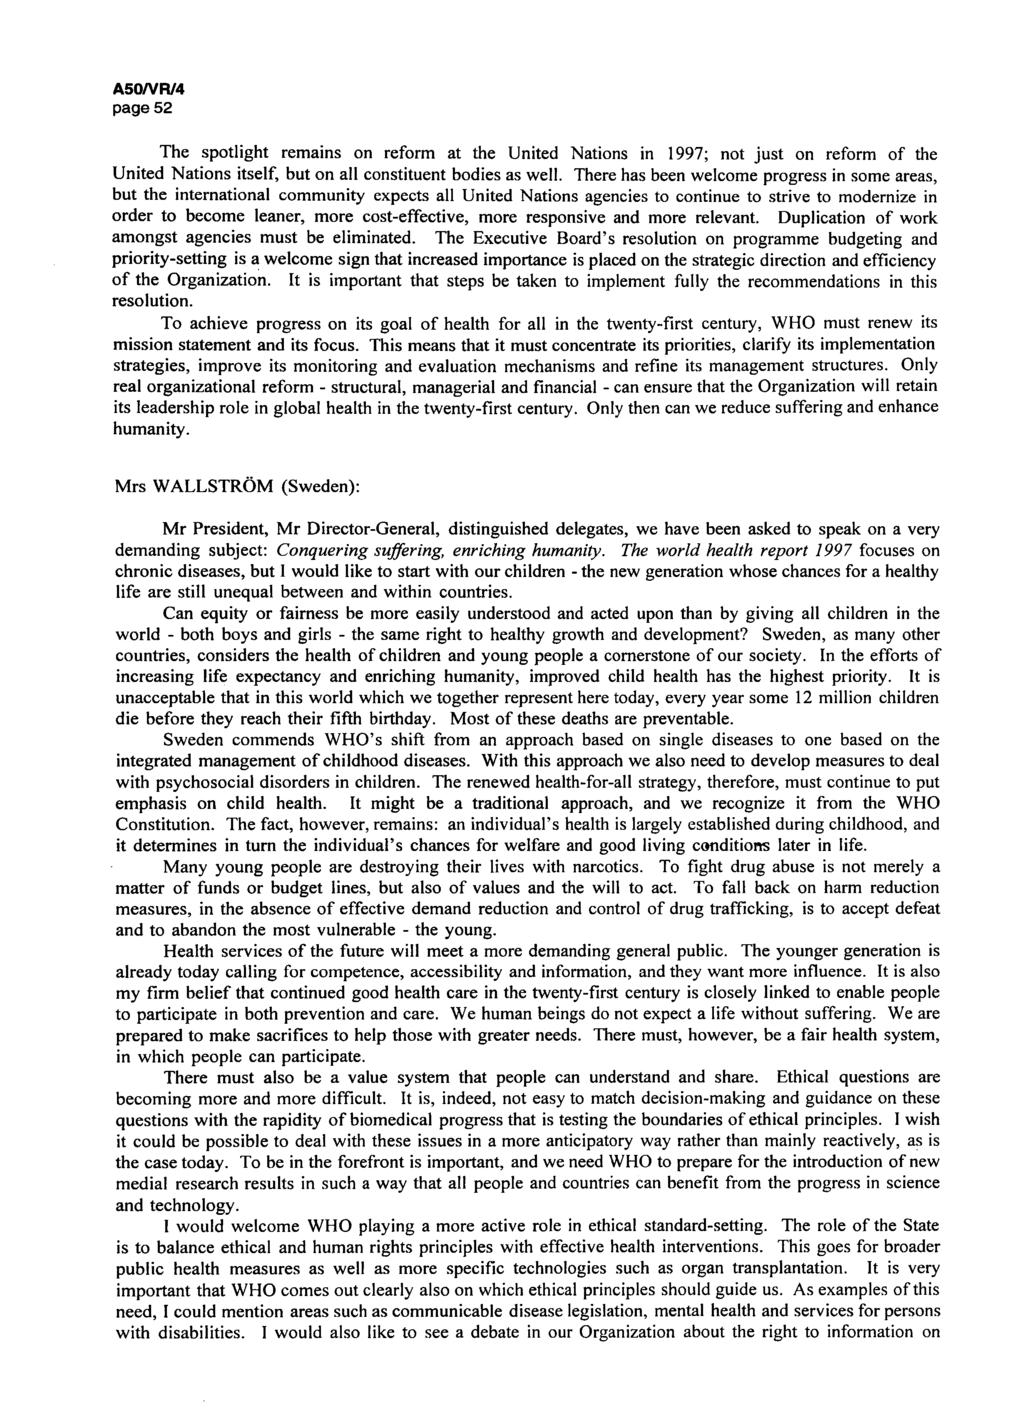 page 52 The spotlight remains on reform at the United Nations in 1997; not just on reform of the United Nations itself, but on all constituent bodies as well.